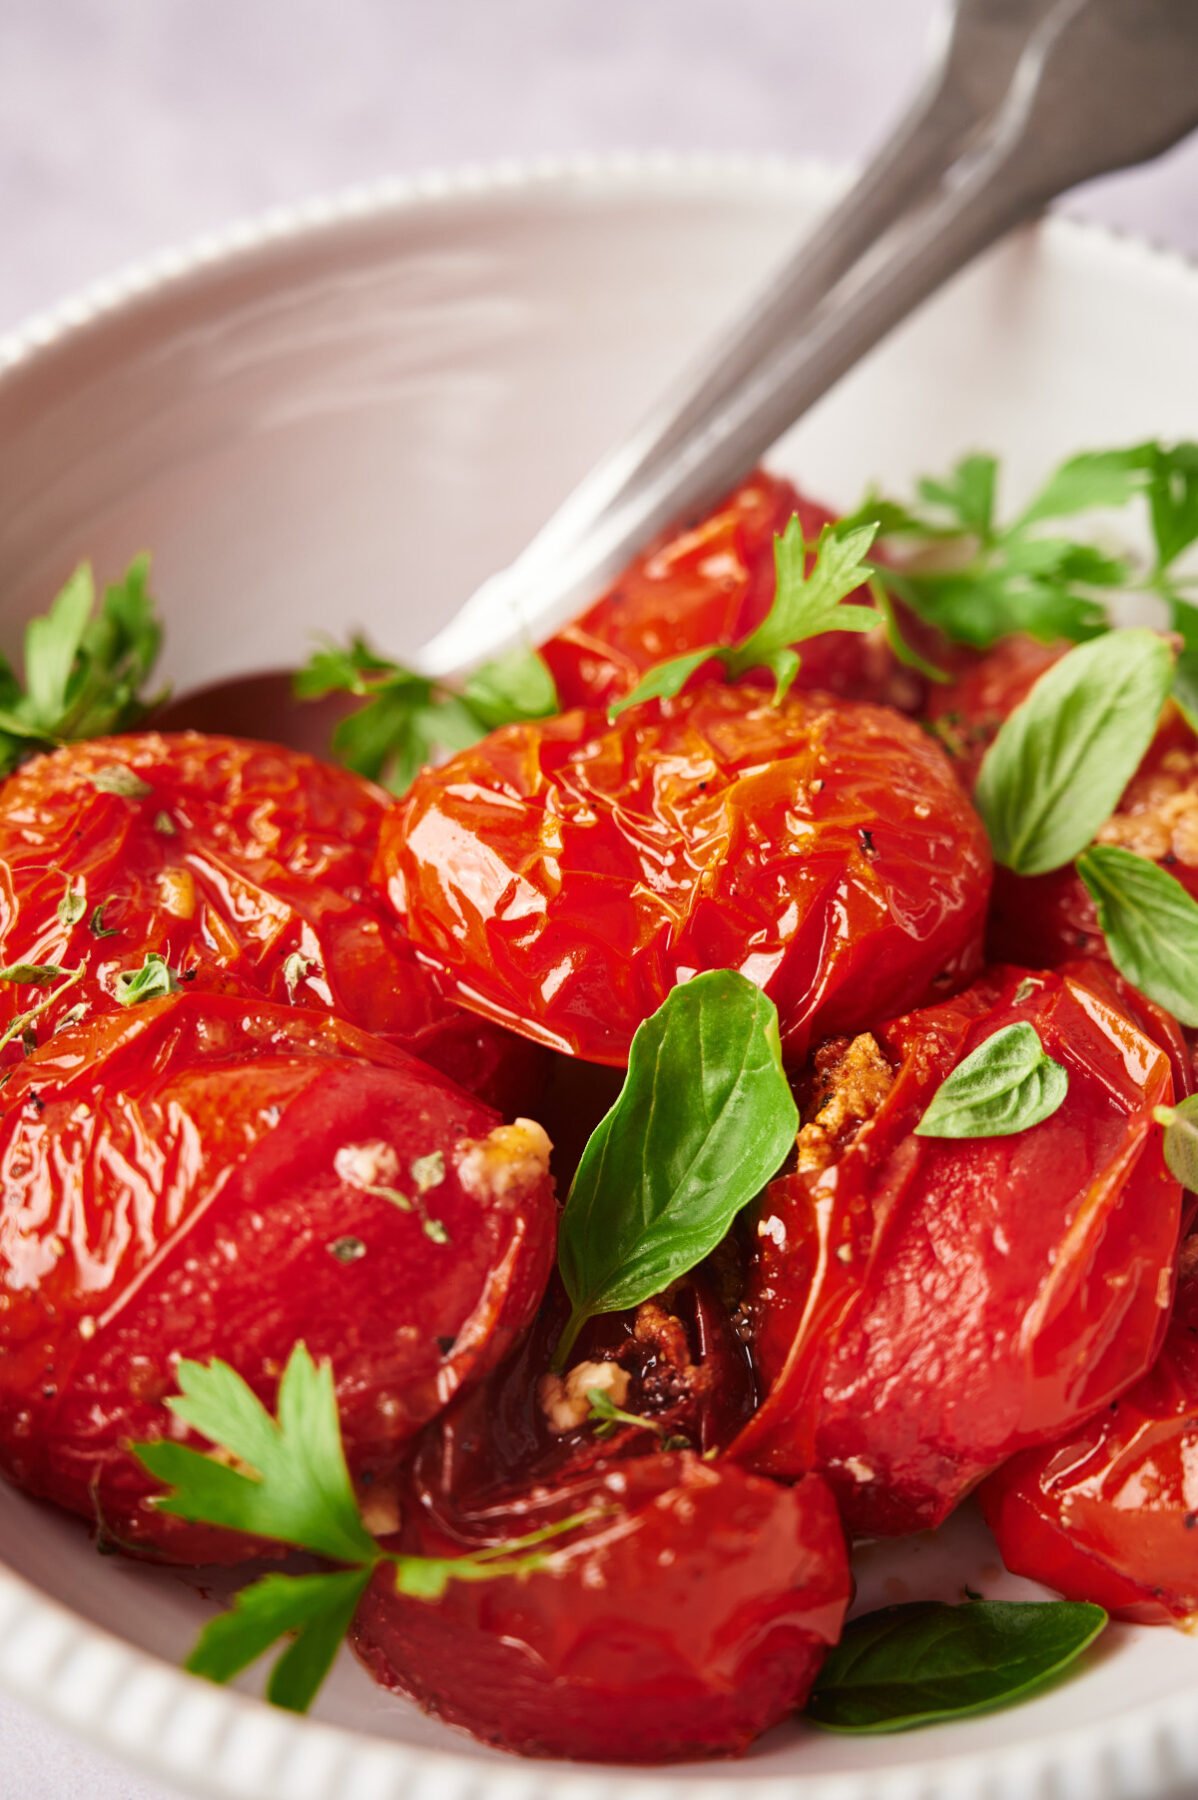 Oven roasted tomatoes in a white bowl garnished with basil and two spoons.